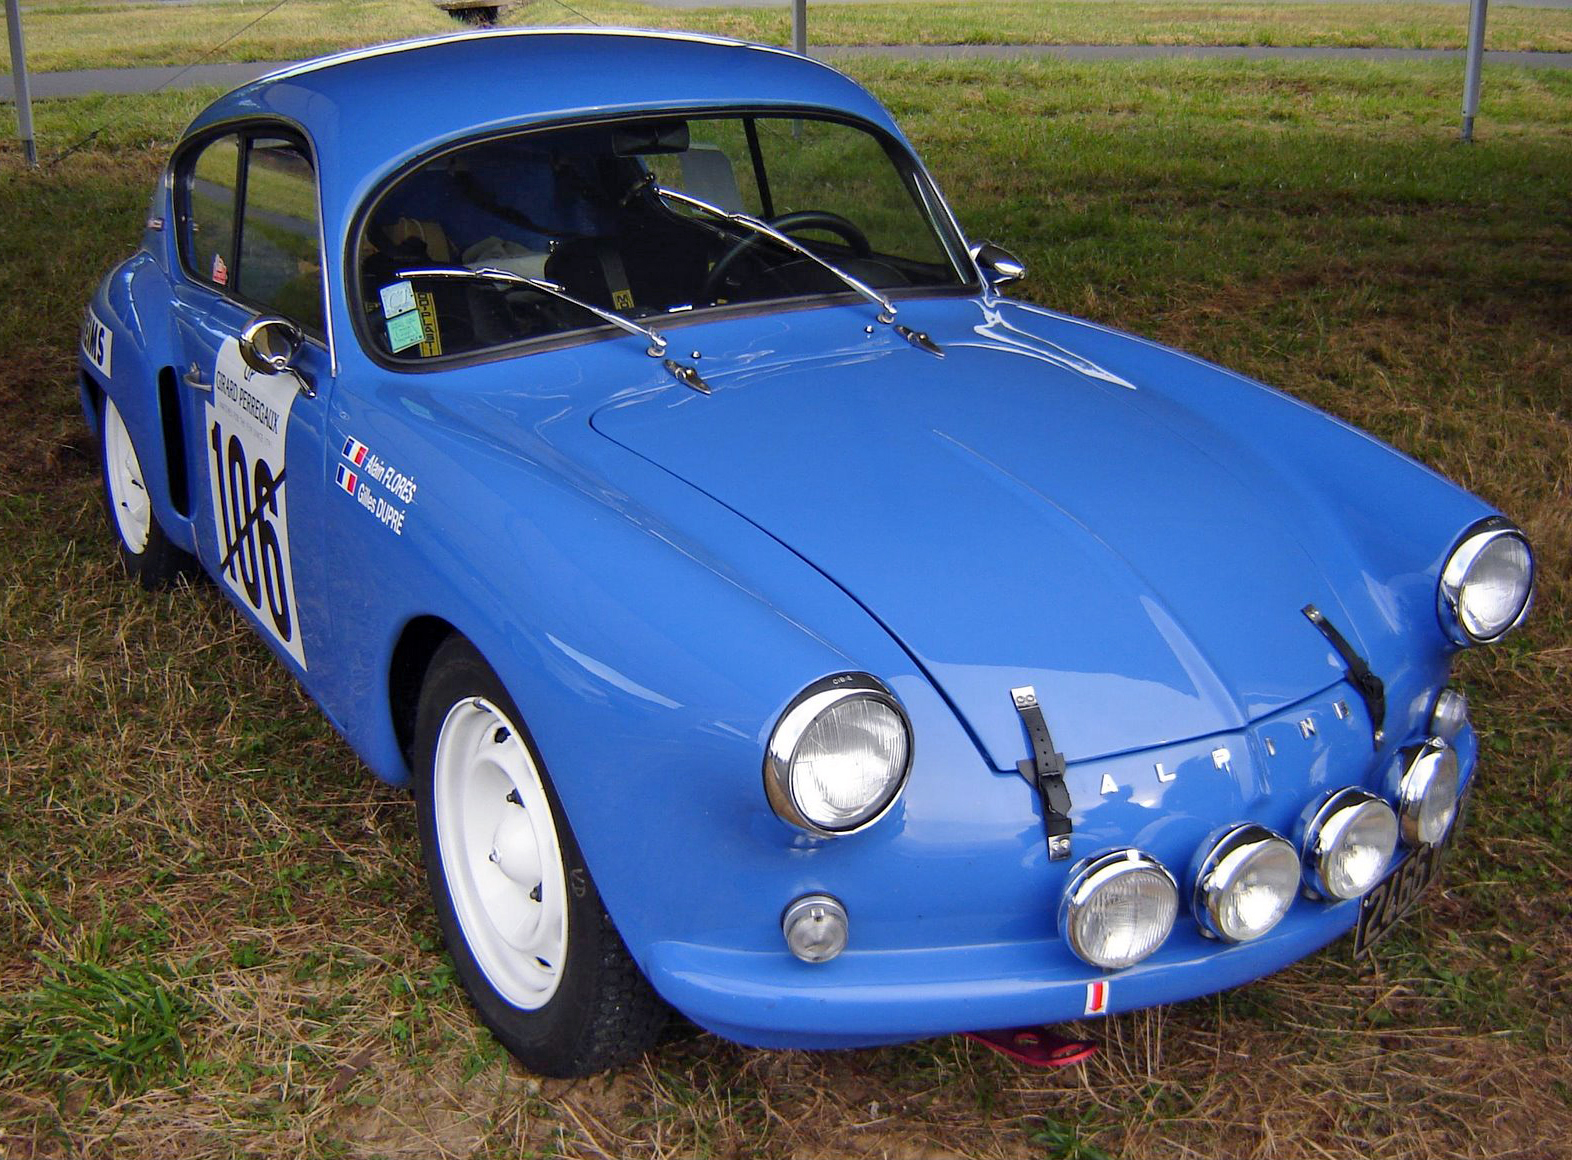 File:1957 Alpine A106 Coach Mille Miles.jpg - Wikimedia Commons